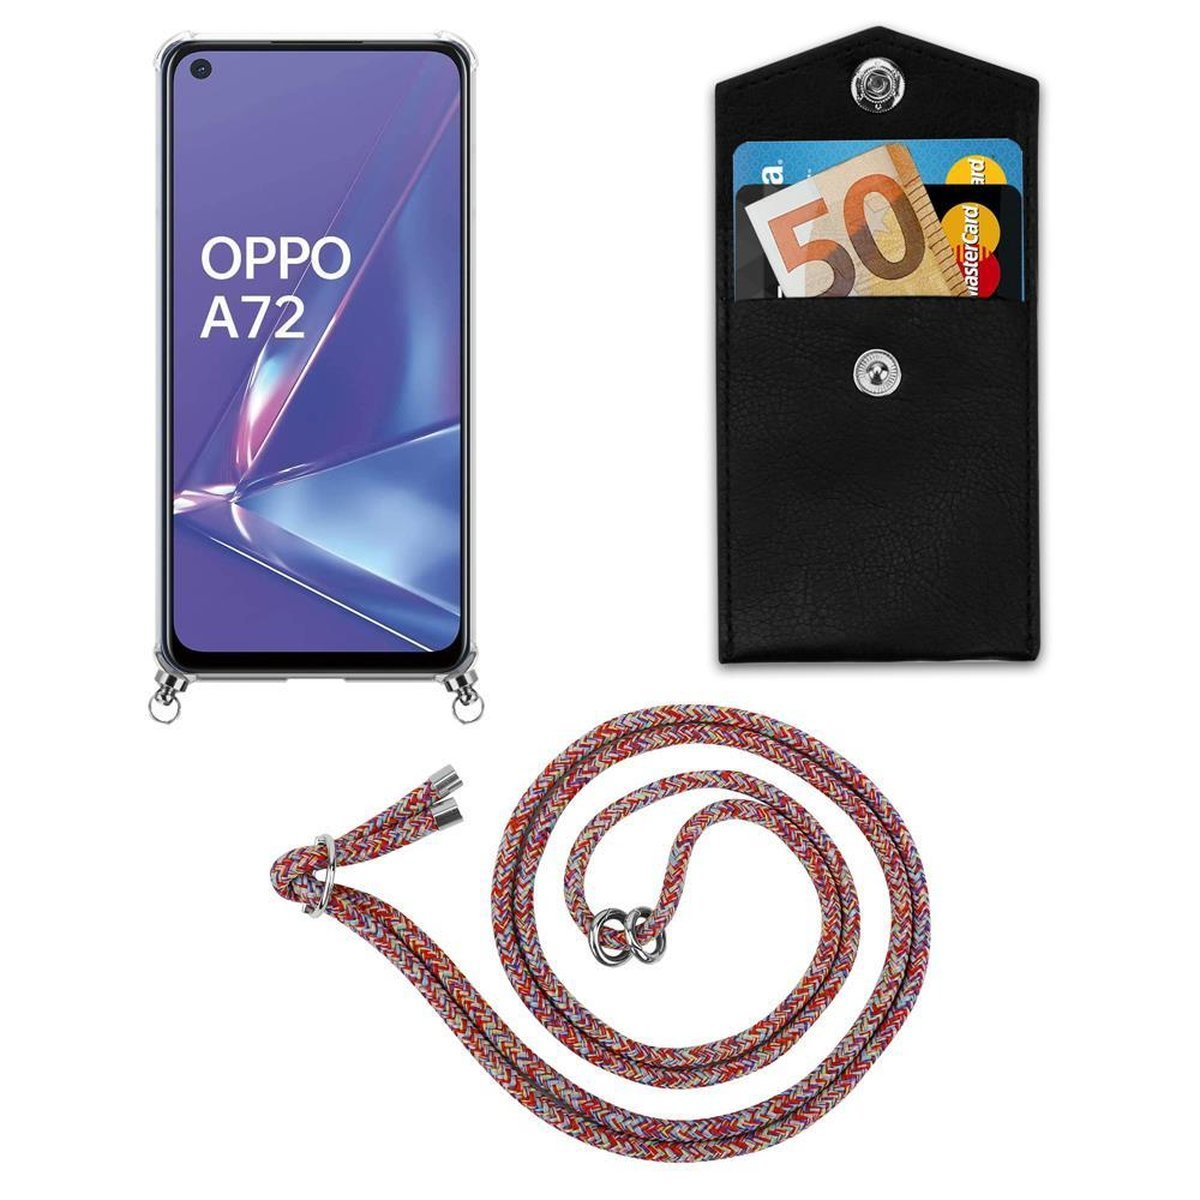 CADORABO Handy Kette mit abnehmbarer Kordel A92, Oppo, Ringen, Band COLORFUL Silber PARROT Backcover, und Hülle